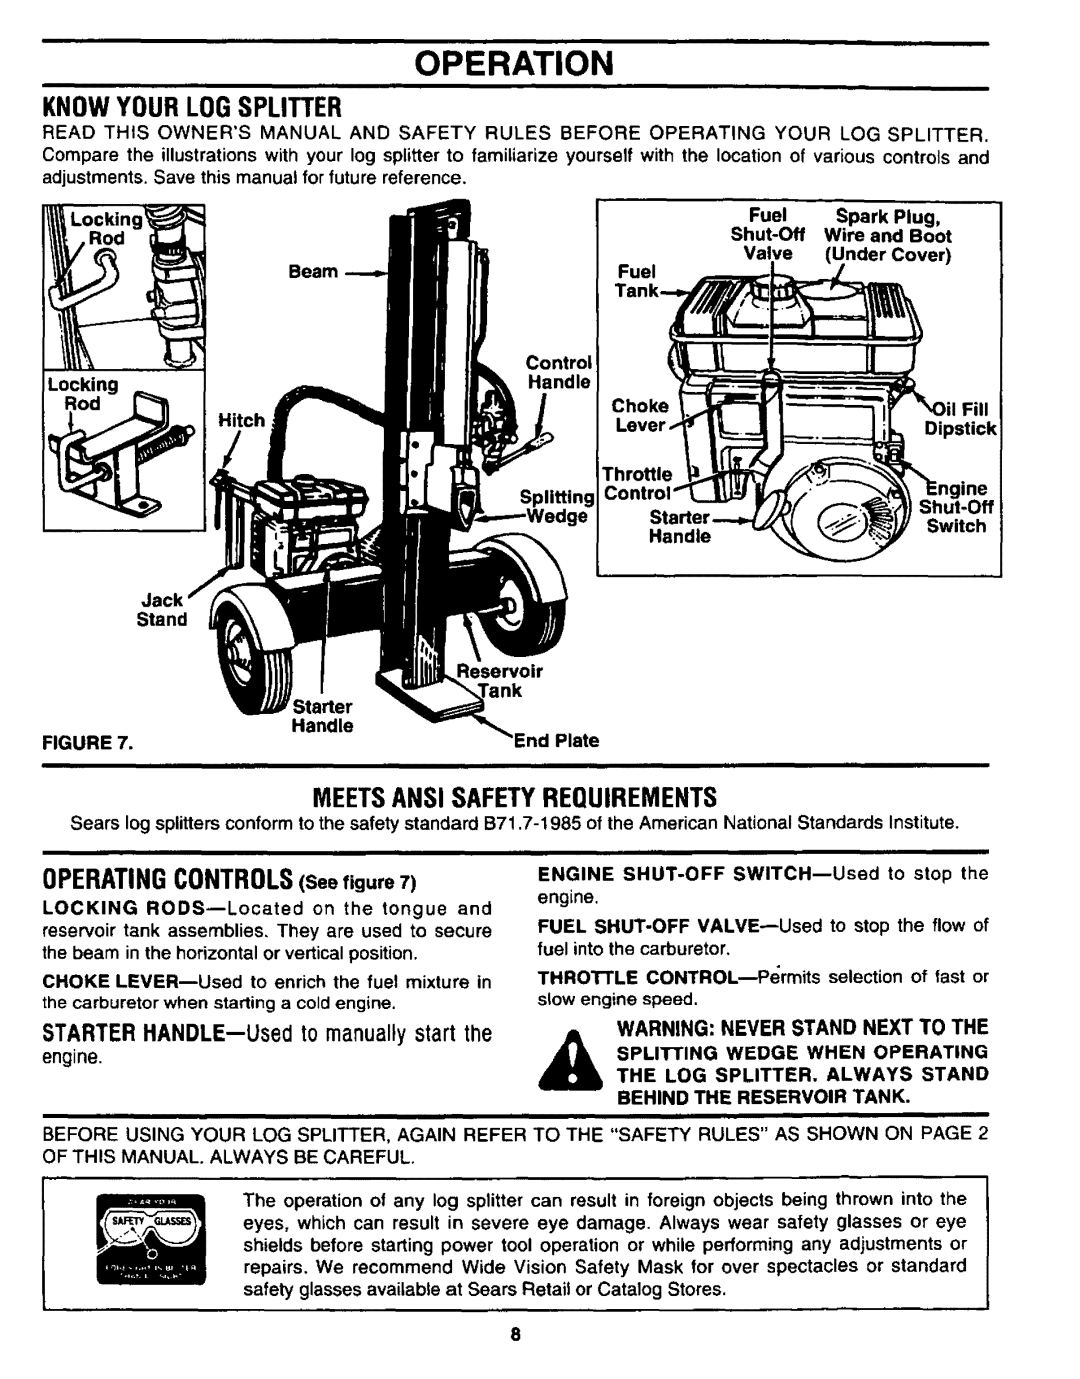 Sears 247.34625 owner manual Operation, Knowyourlogsplitter, OPERATINGCONTROLSSee figure, Meets Ansi Safety Requirements 